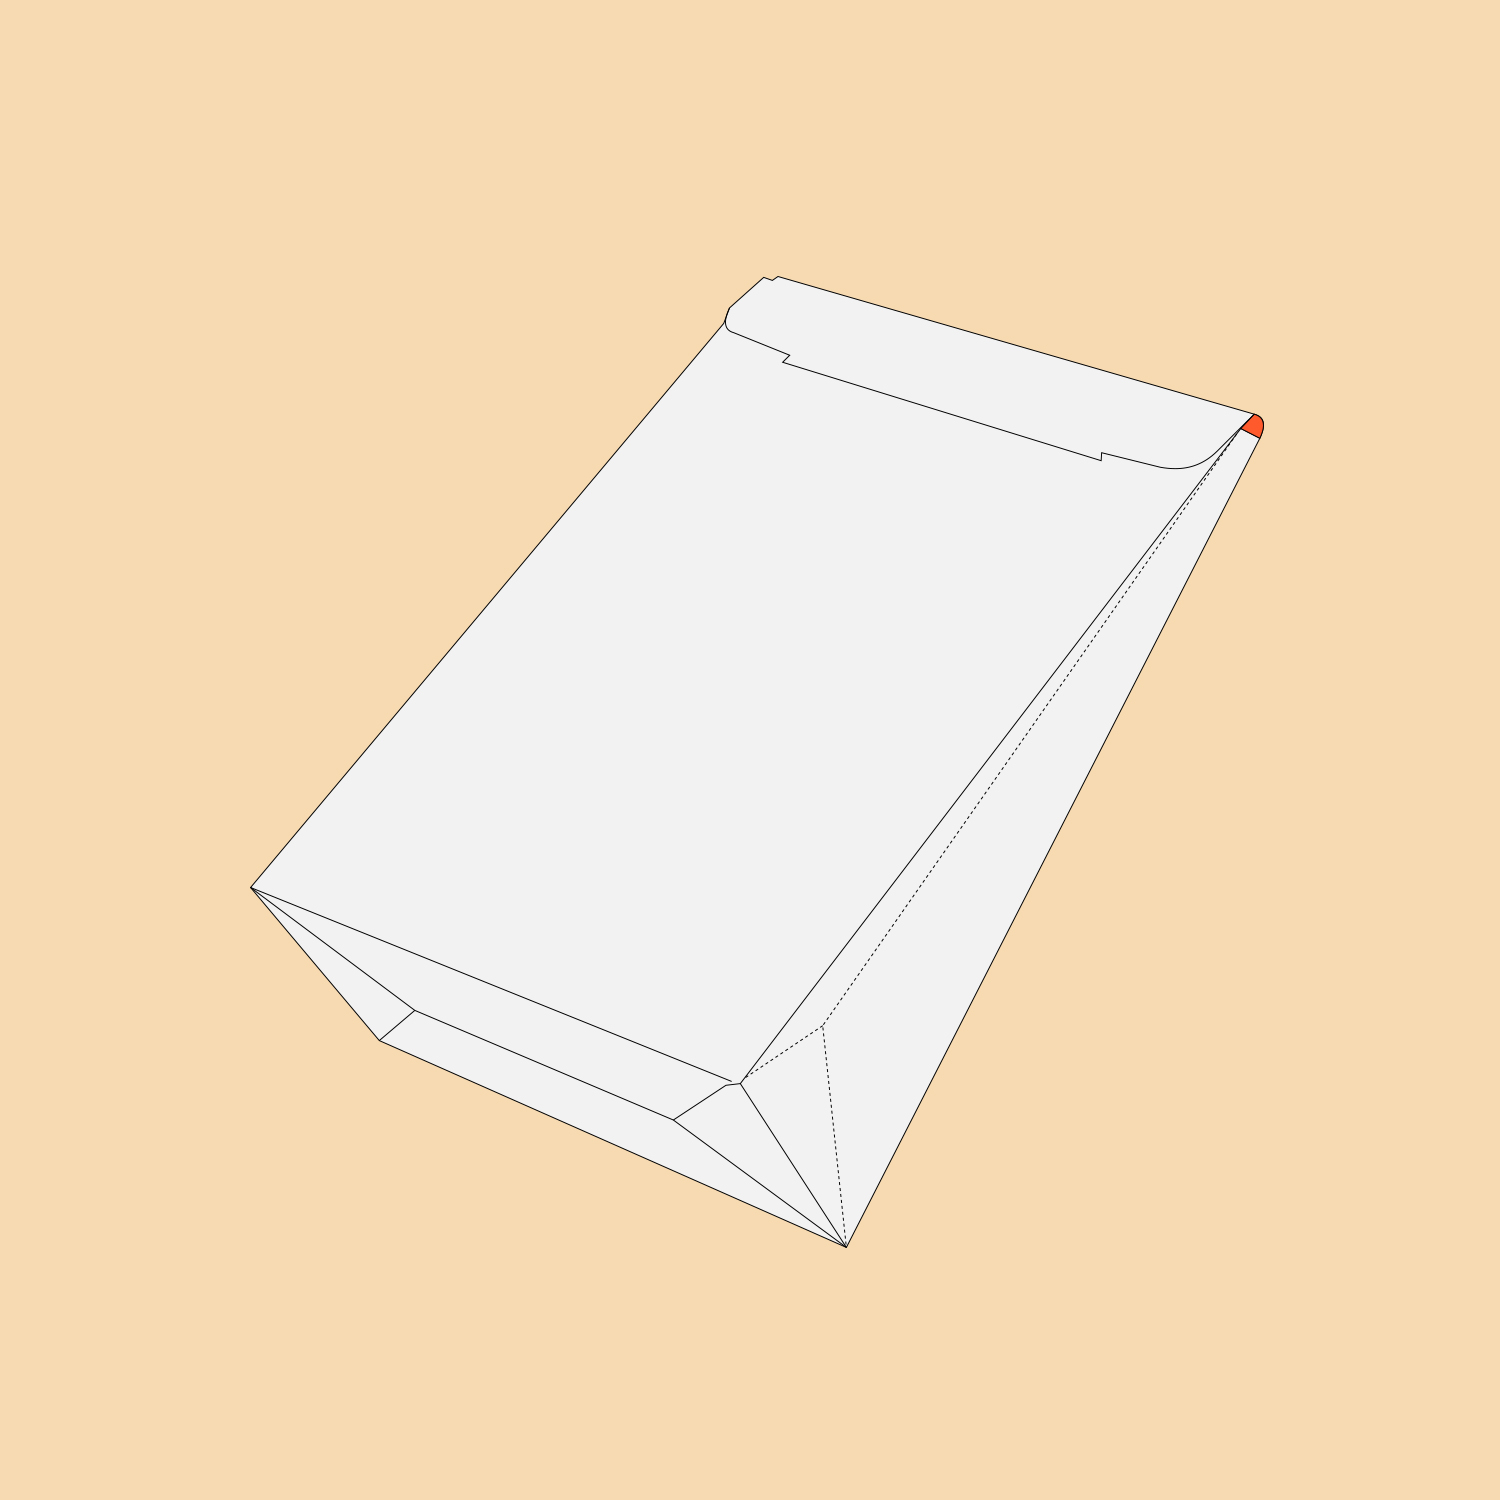 able-Box-3D-View-1